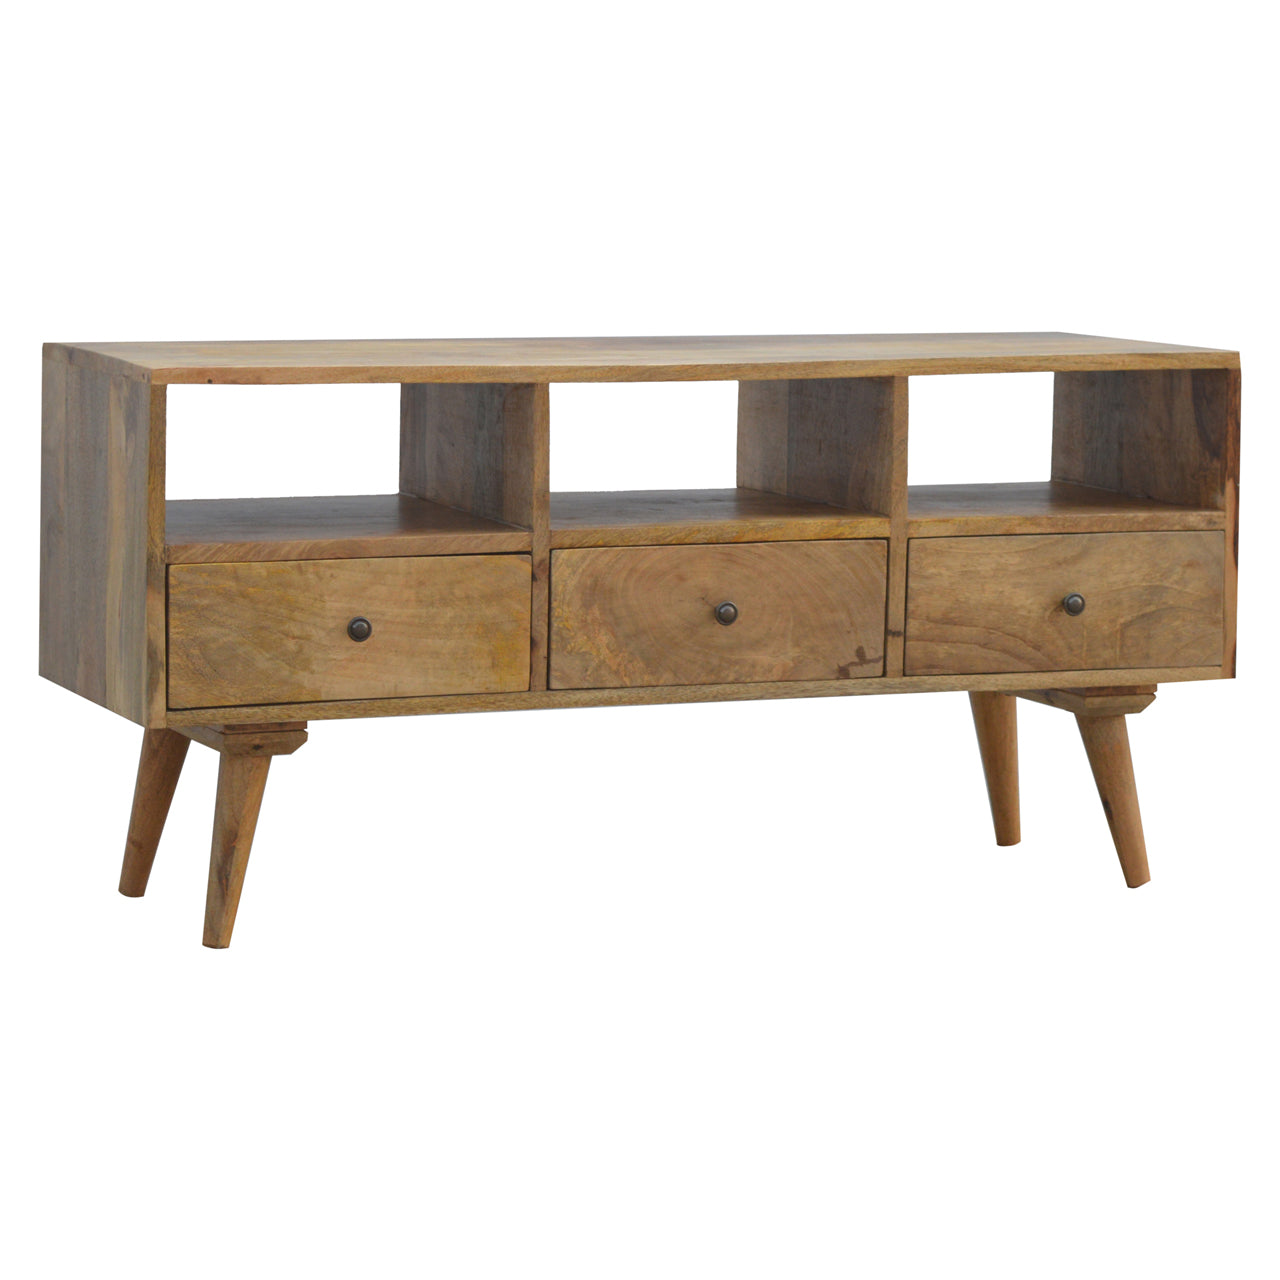 View Nordic Style TV Unit with 3 Drawers information